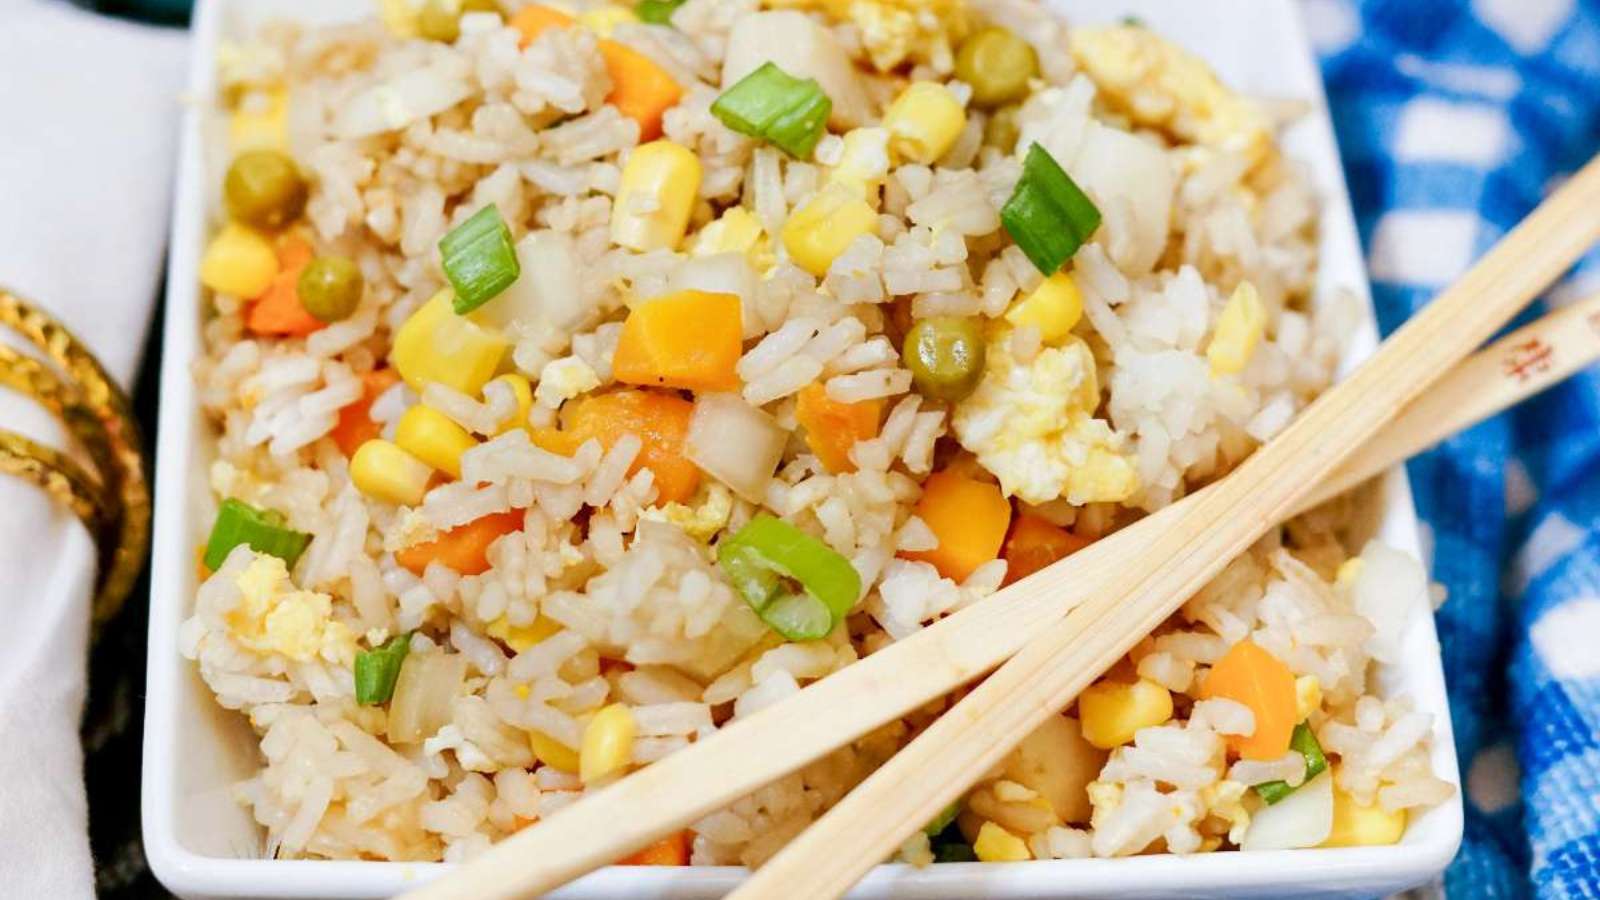 Fried rice in a white bowl with chopsticks.